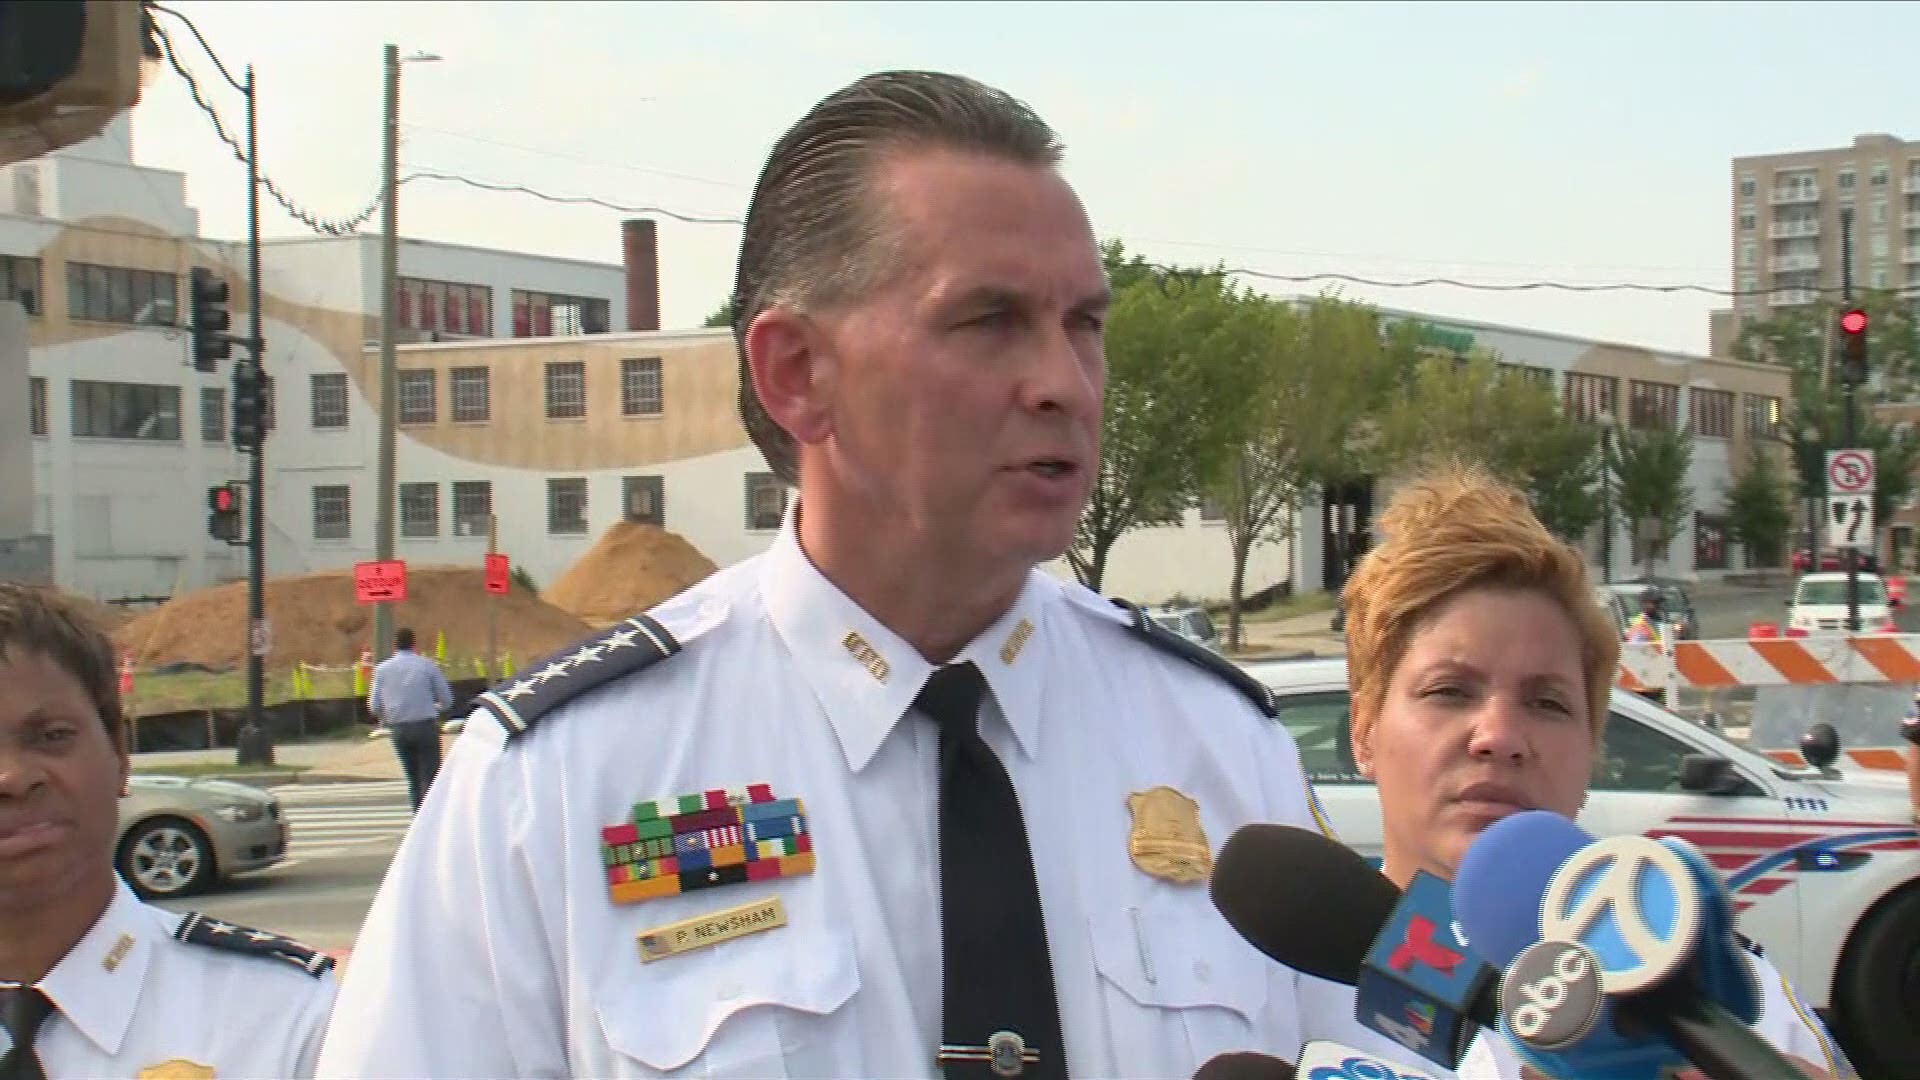 Chief Newsham identified the victim as Robert Bolich, 62. He was a contract worker working on the bridge, he said.